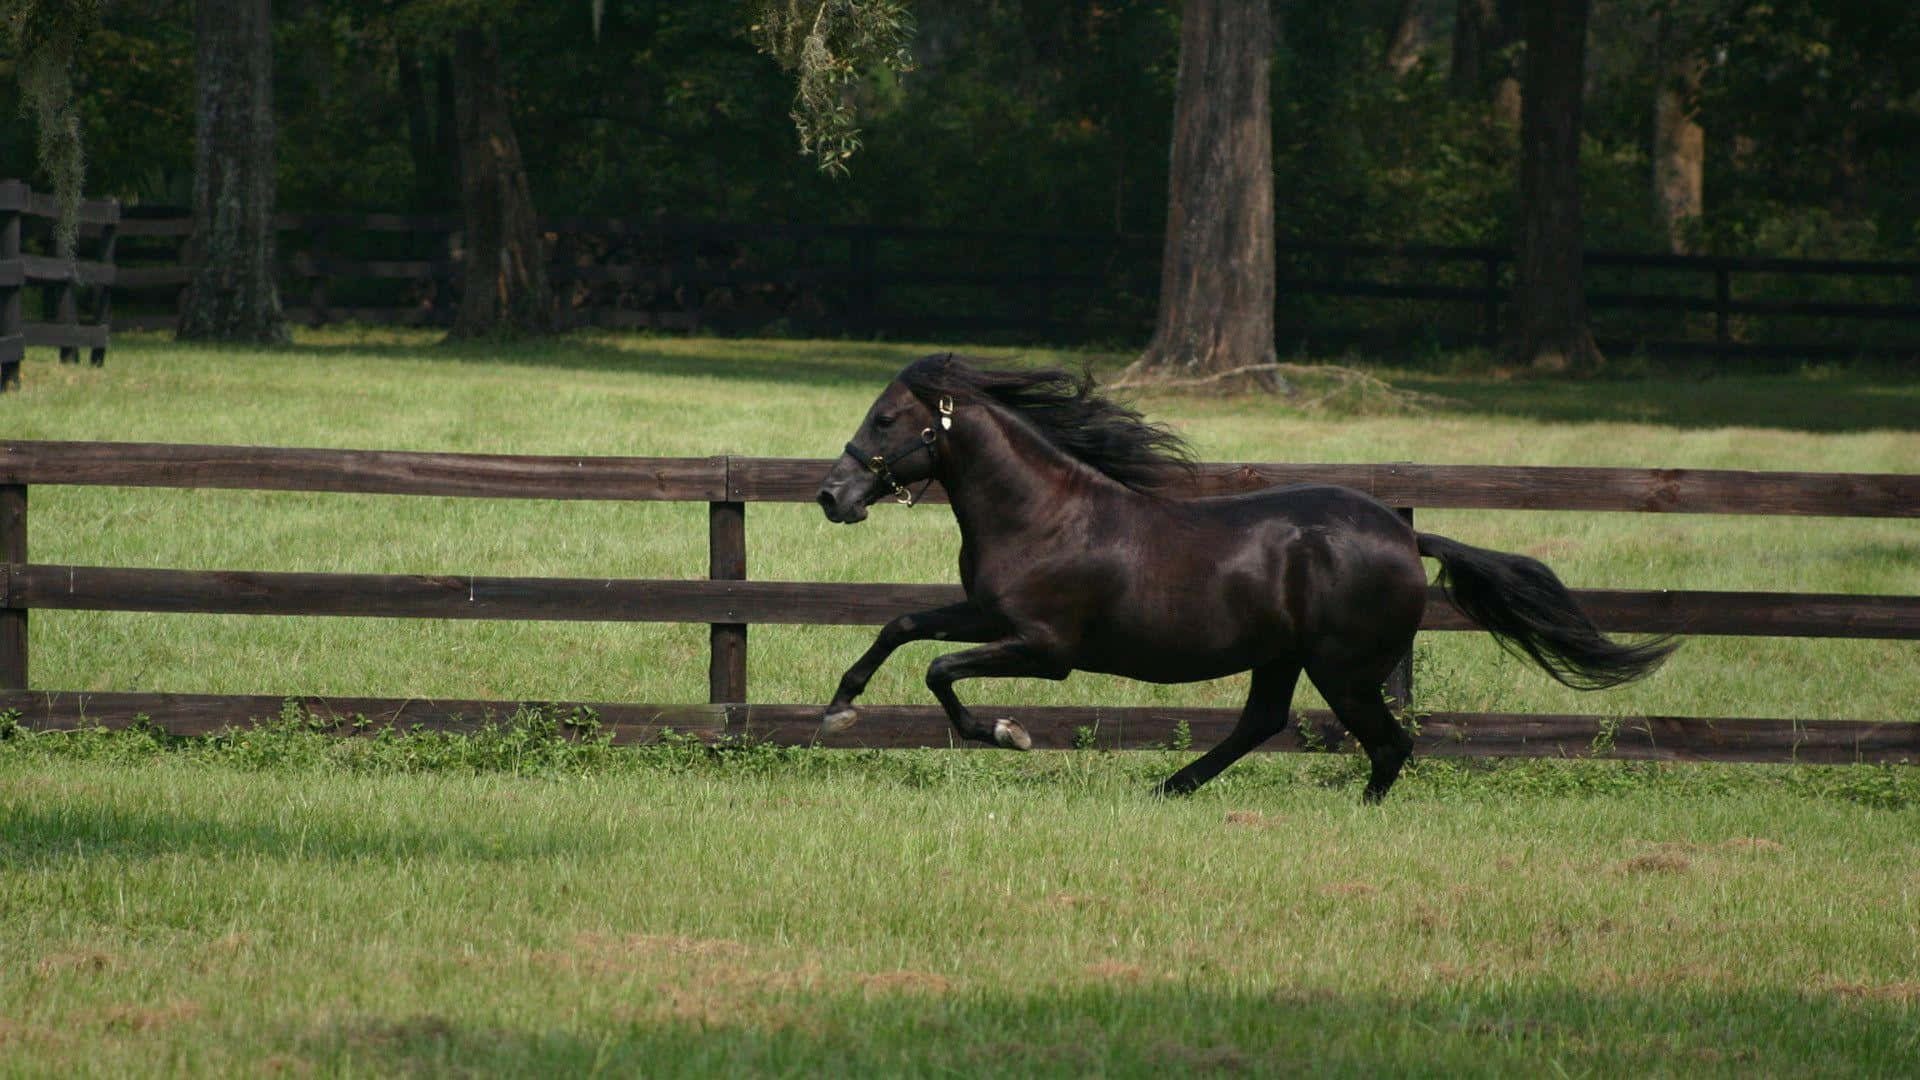 A Stunning Black Horse Grazing in Pasture